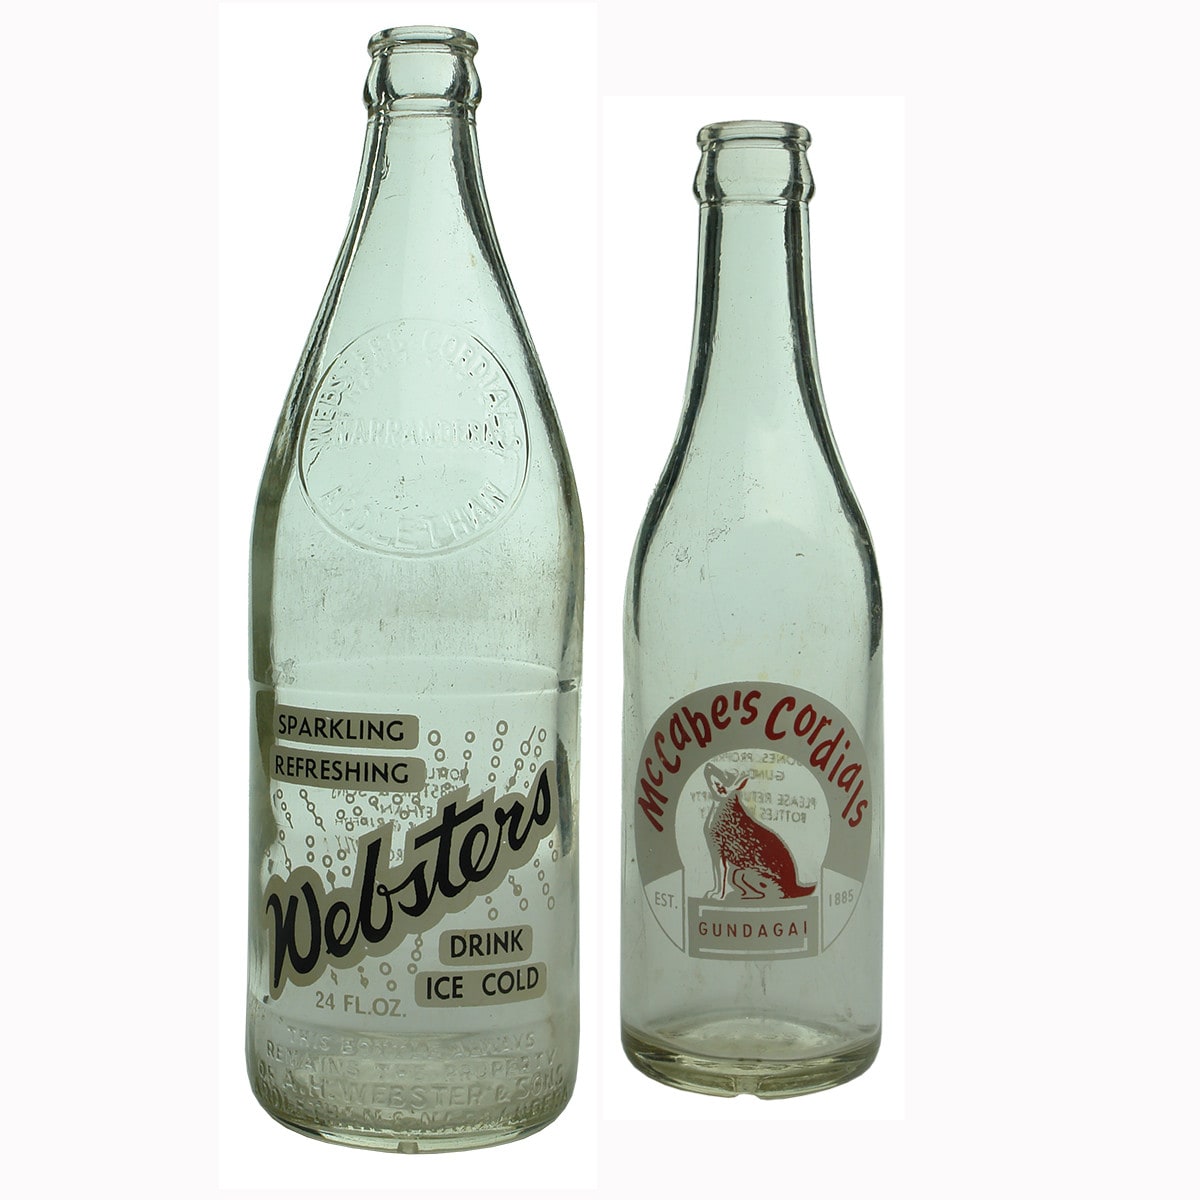 Pair of Ceramic Label Crown Seals: Websters, Ardlethan, Narrandera & Griffith; McCabe's Cordials, Gundagai.